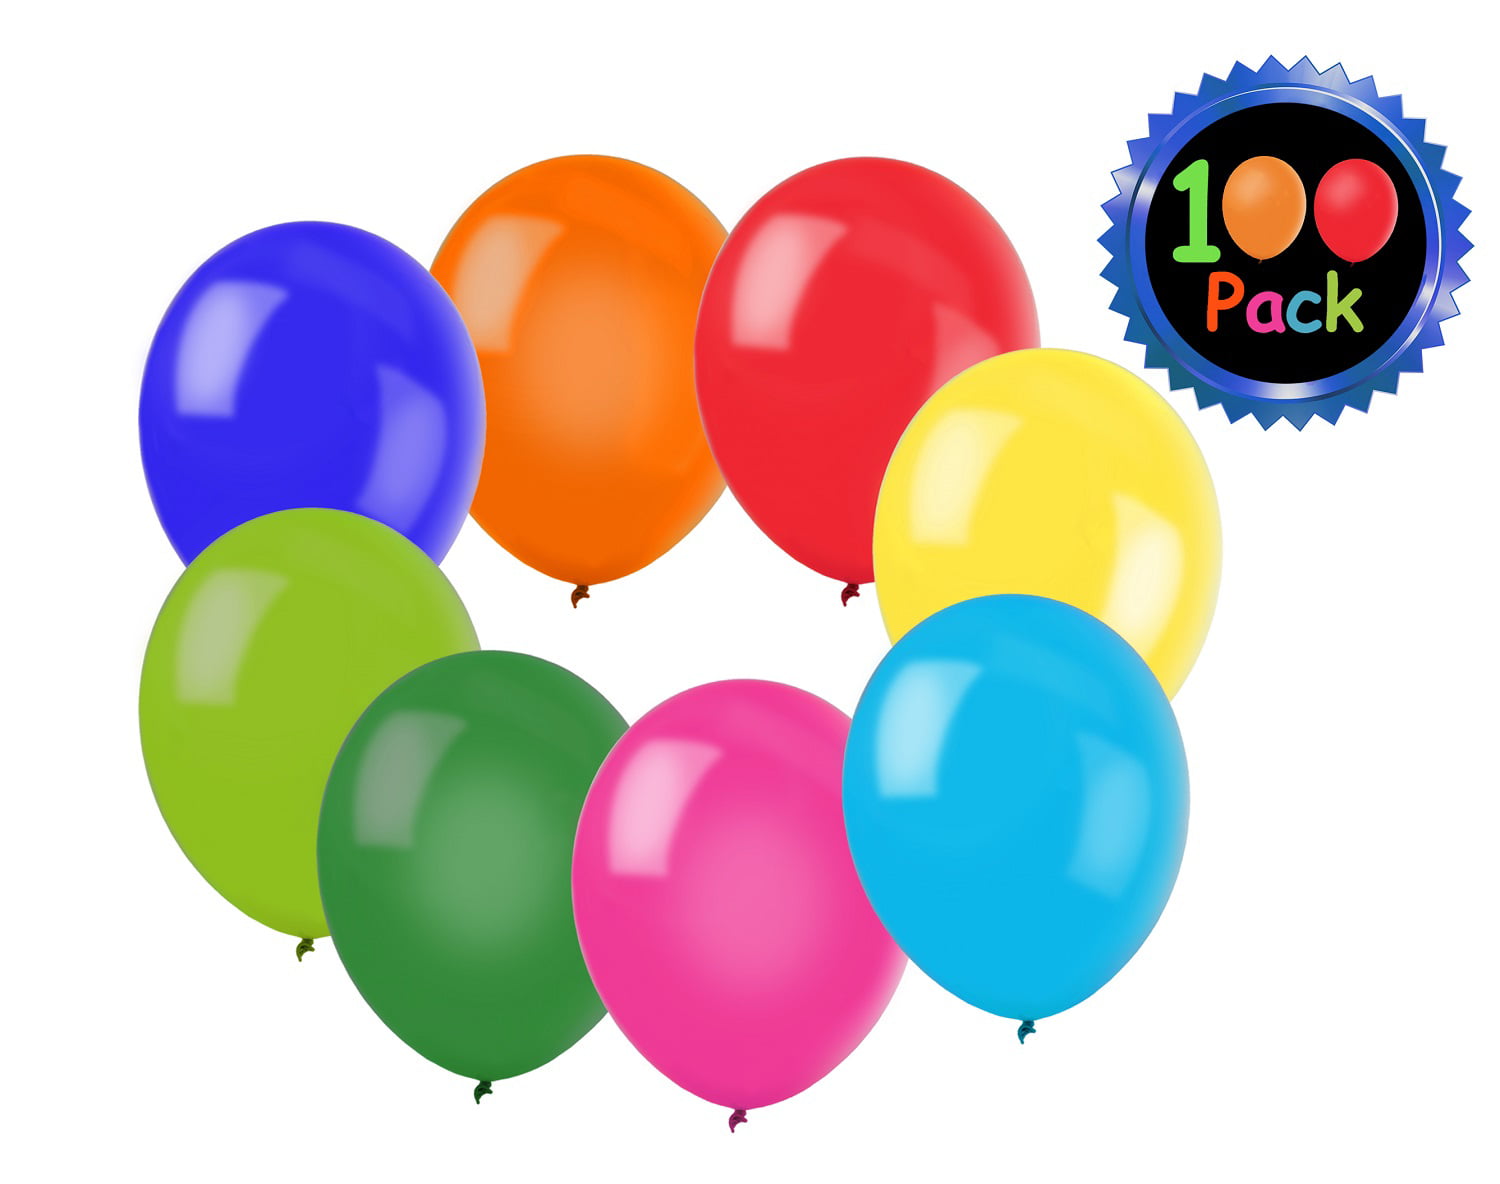 100 X 12" Assorted Colour Balloons Party Birthday Celebration Baloons Decoration 